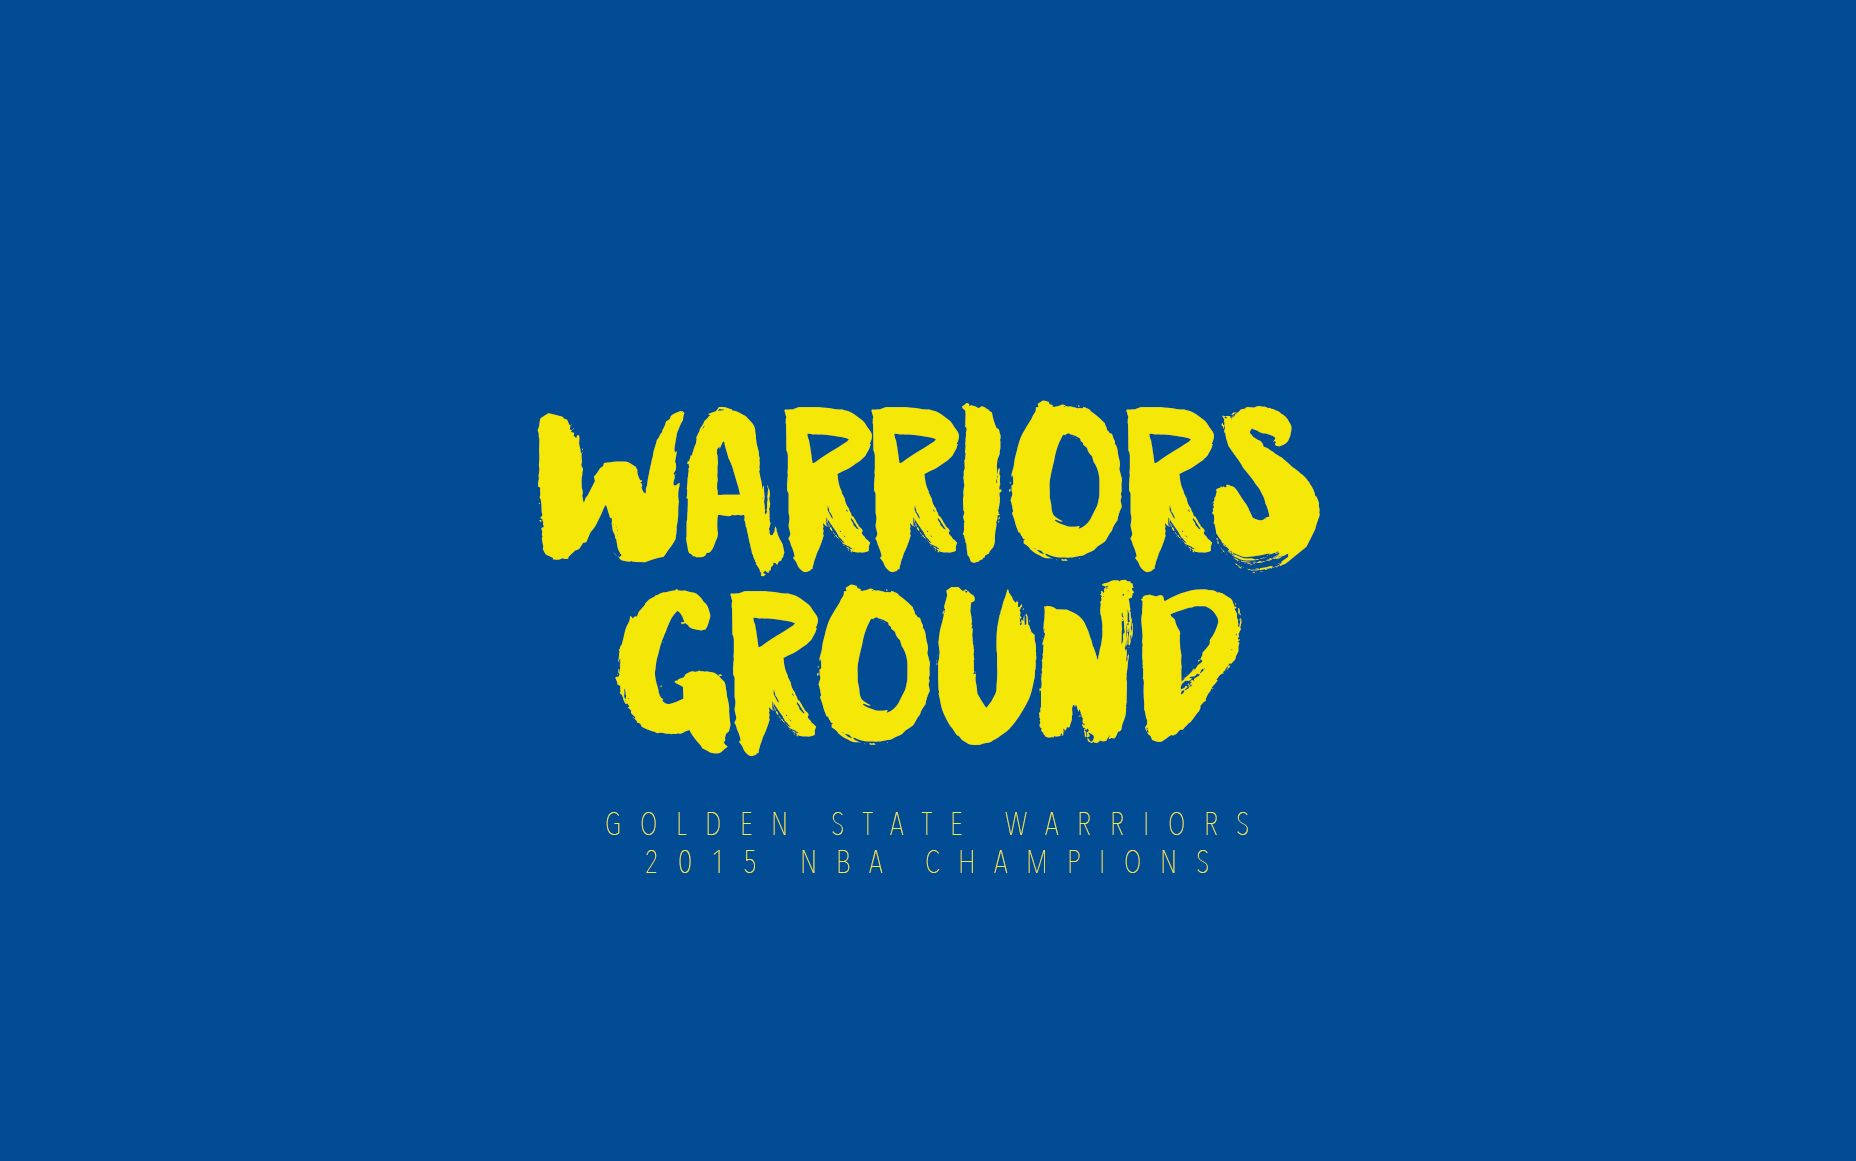 Golden State Warriors Simple Poster Background